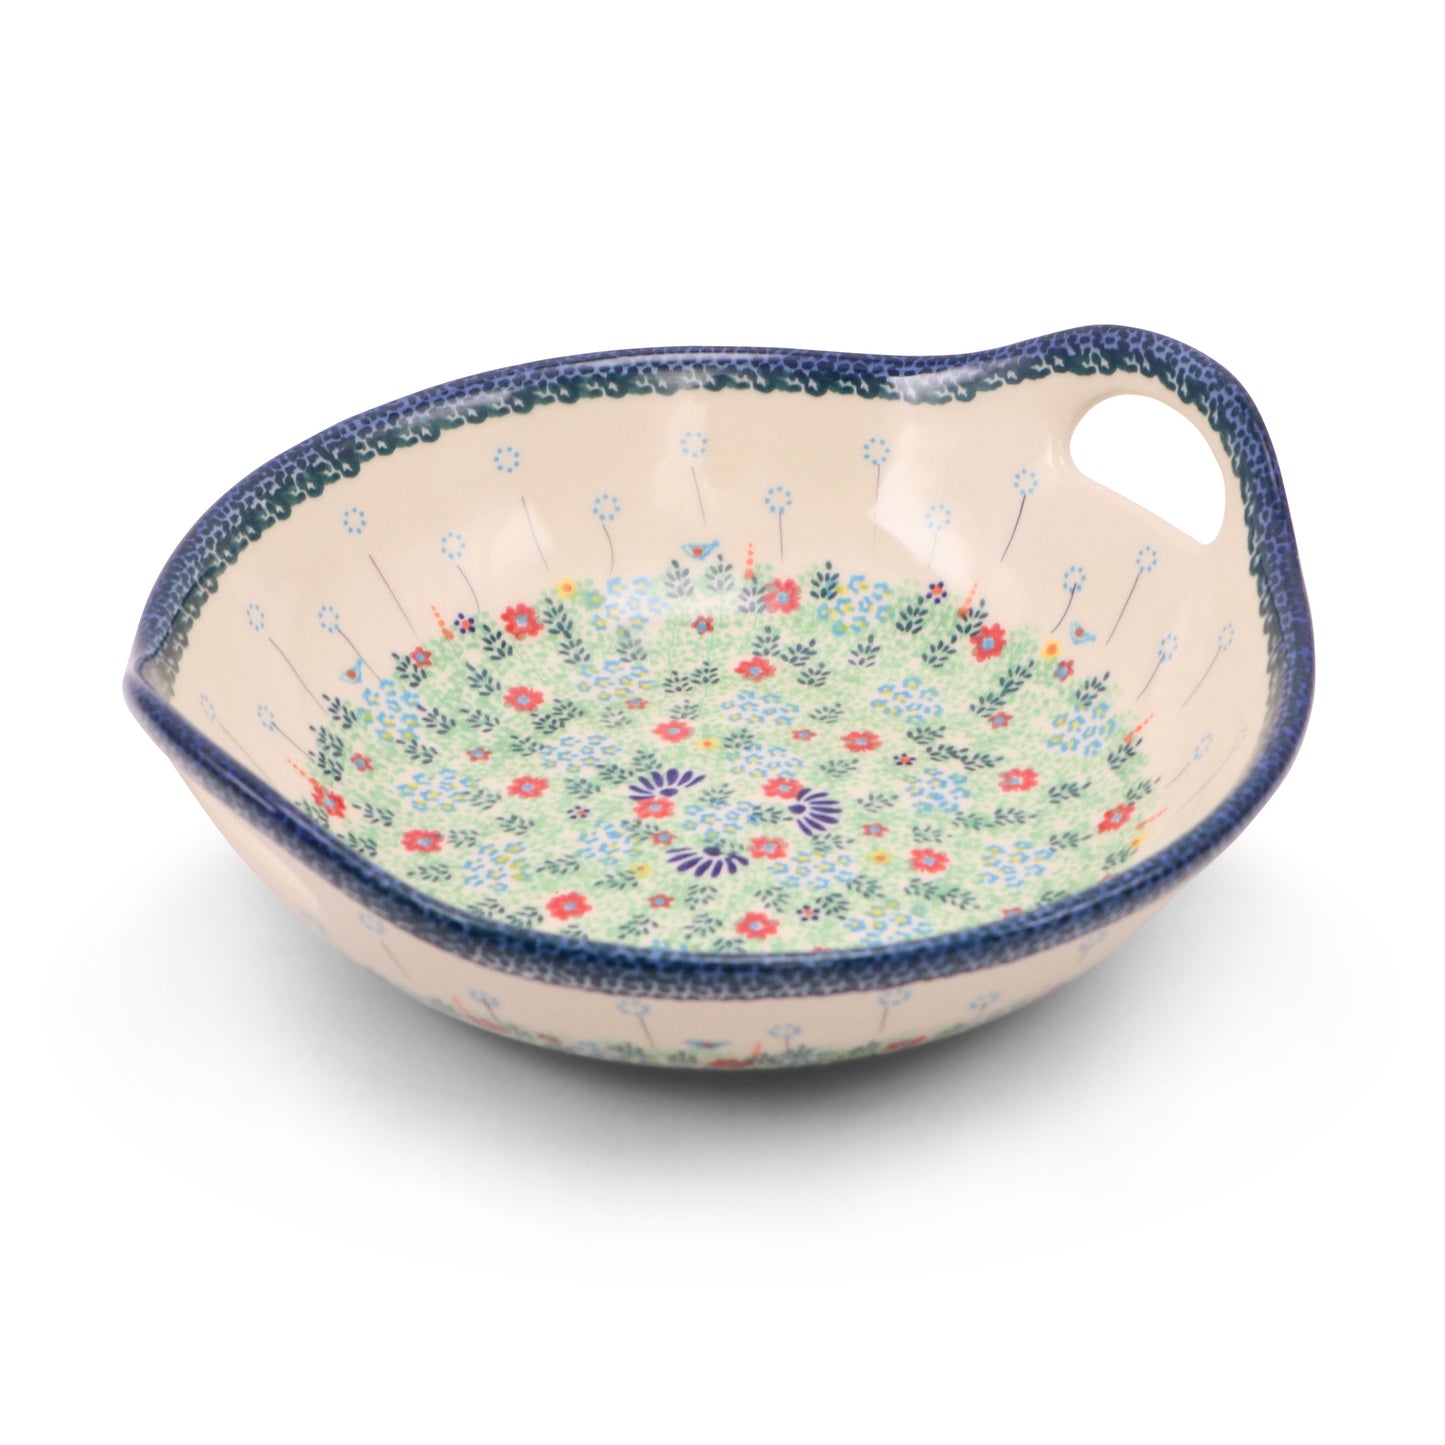 10" Bowl with Handles. Pattern: Spring Bouquet